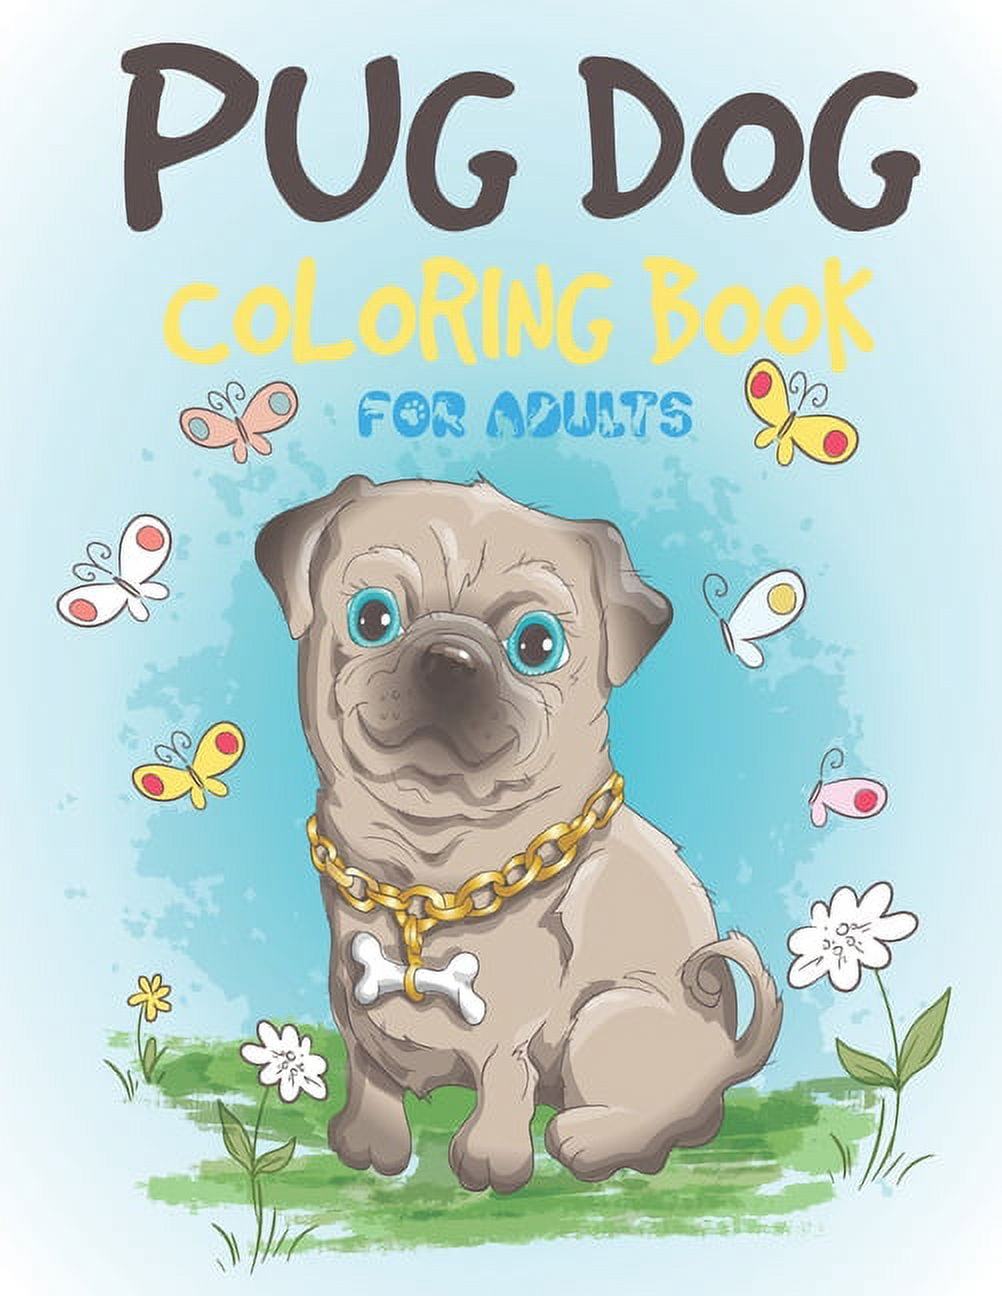 Dog Coloring Book Funny: Dog Coloring Books For Kids, children, toddlers,  crayons, adult, mini, girls and Boys. Large 8.5 x 11. 50 Pages  (Paperback) 